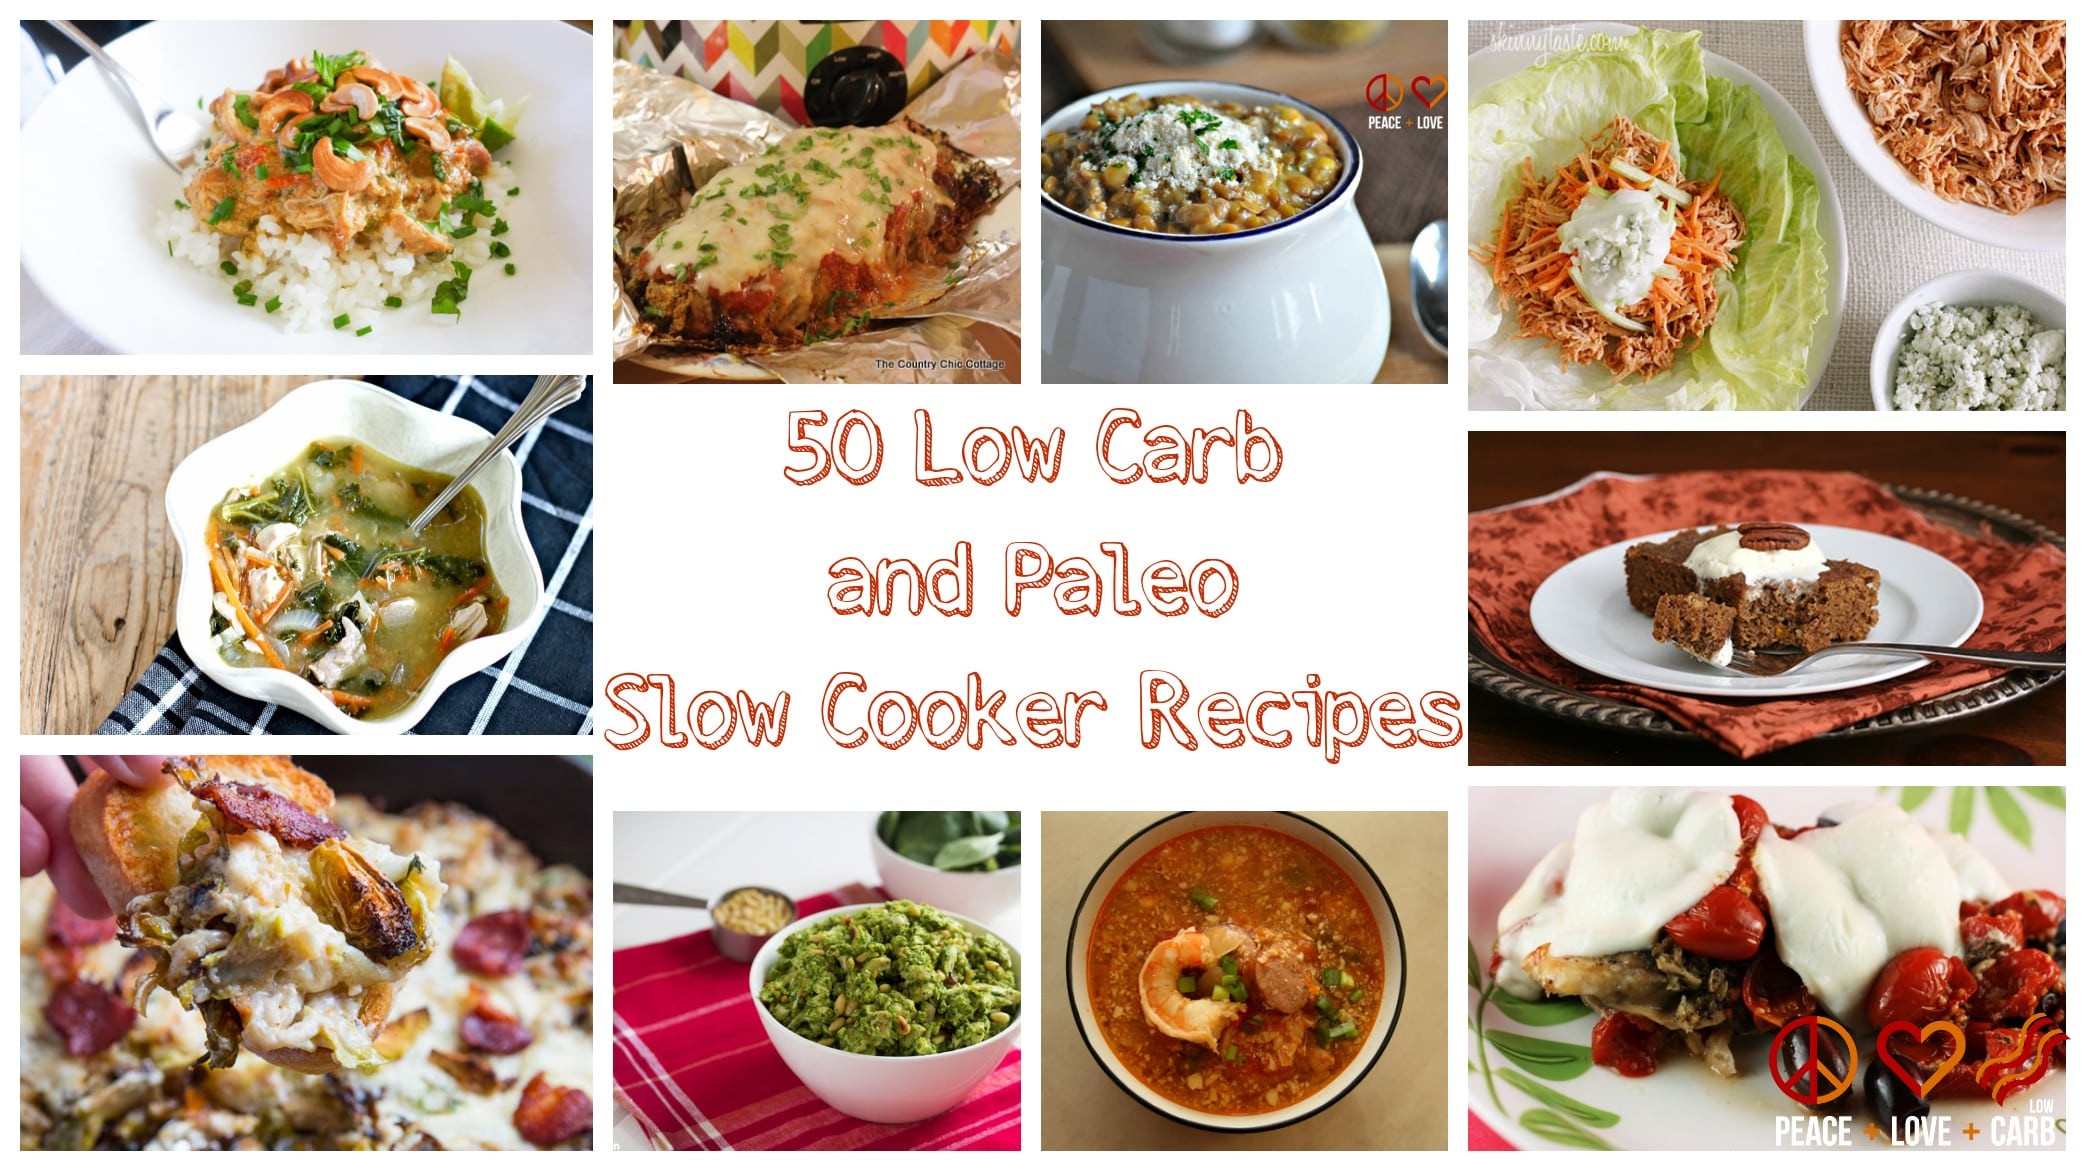 Healthy Low Carb Slow Cooker Recipes
 50 Low Carb and Paleo Slow Cooker Recipes